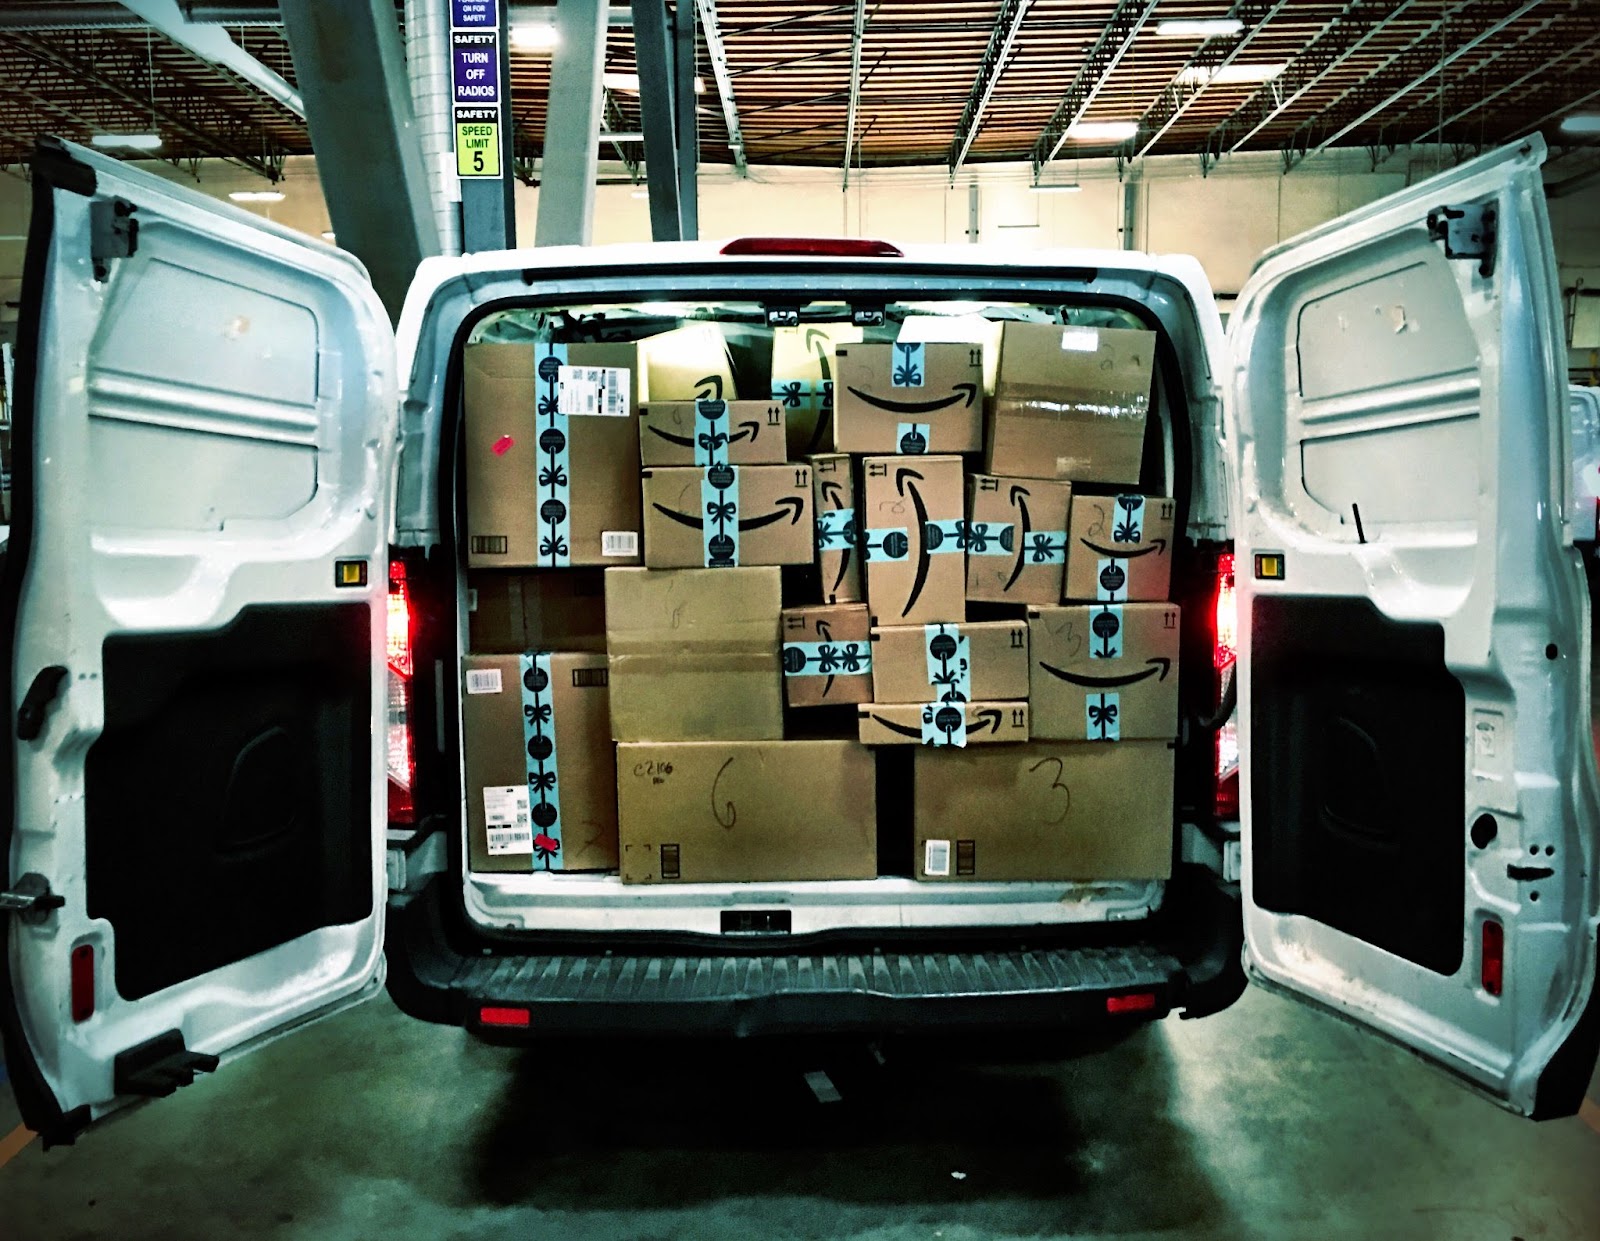 An delivery vans back doors open showing it filled with Amazon boxes